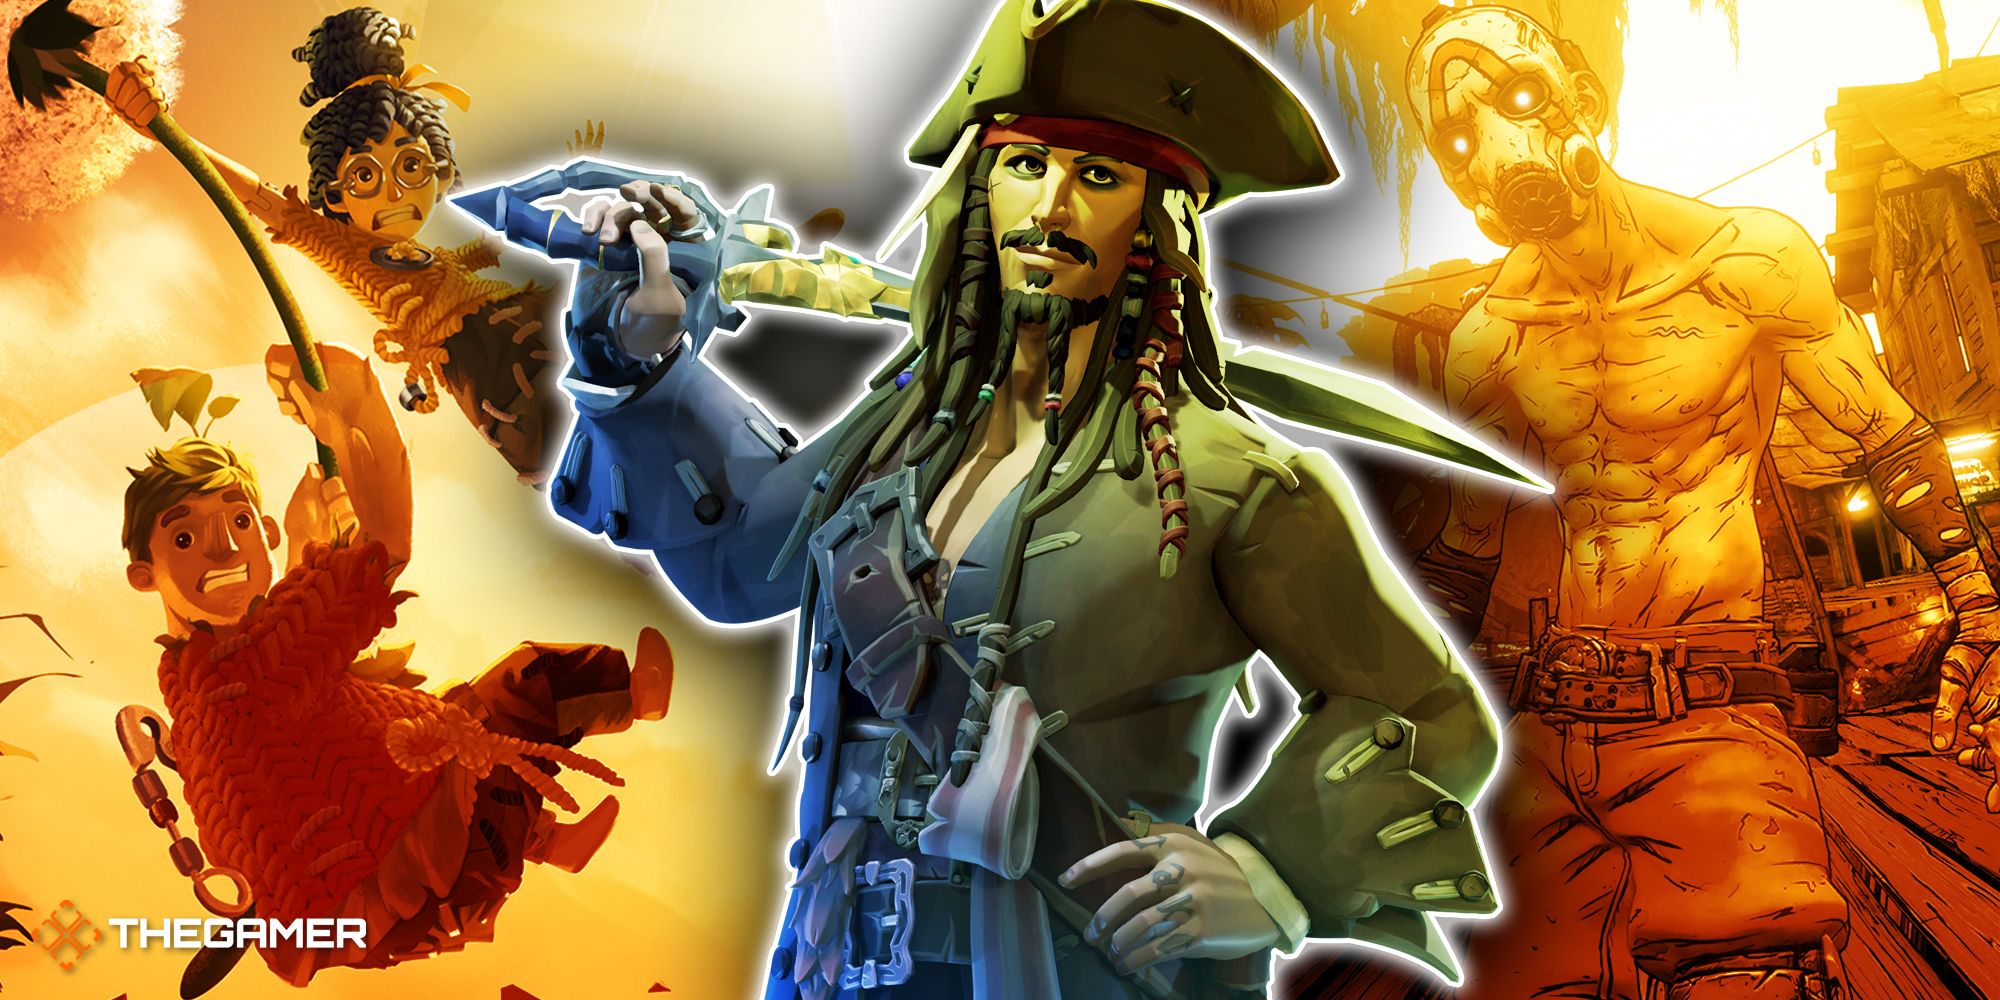 Game art from It Takes Two, Sea Of Thieves and Borderlands 3.